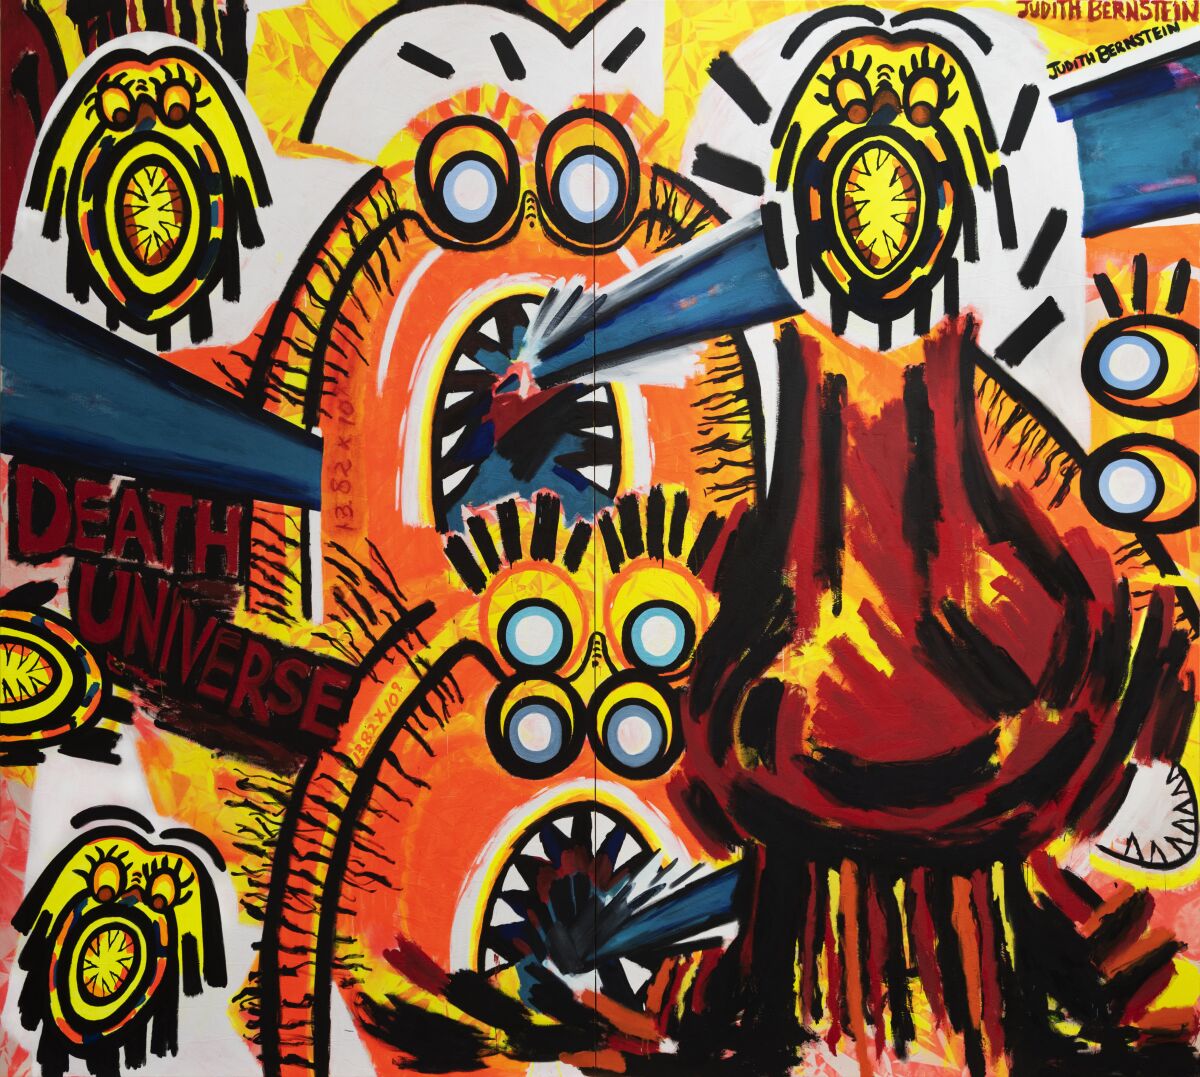 A painting in orange, yellow, blue and brown shows a series of angry creatures with wide eyes and jagged teeth